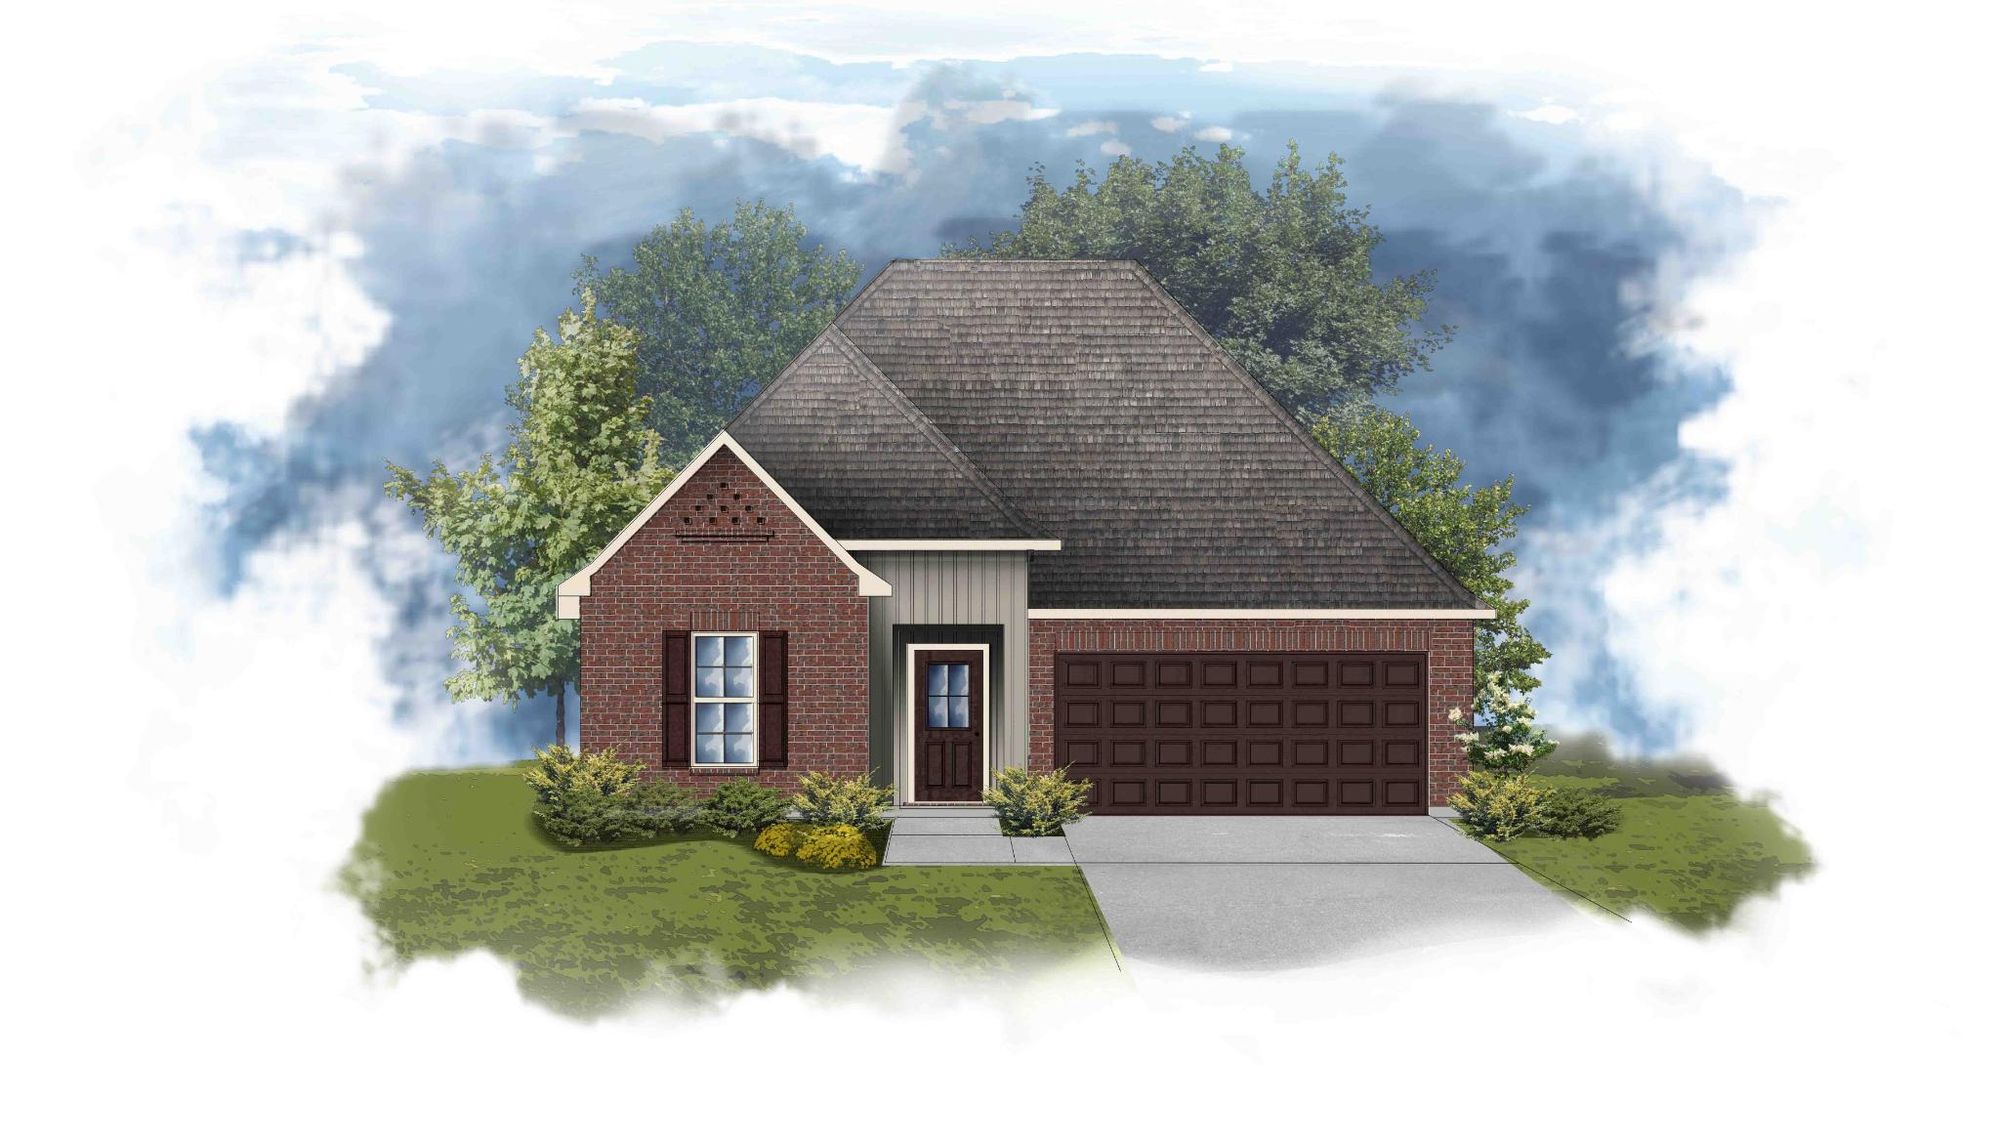 Townsend III G - Front Elevation - DSLD Homes